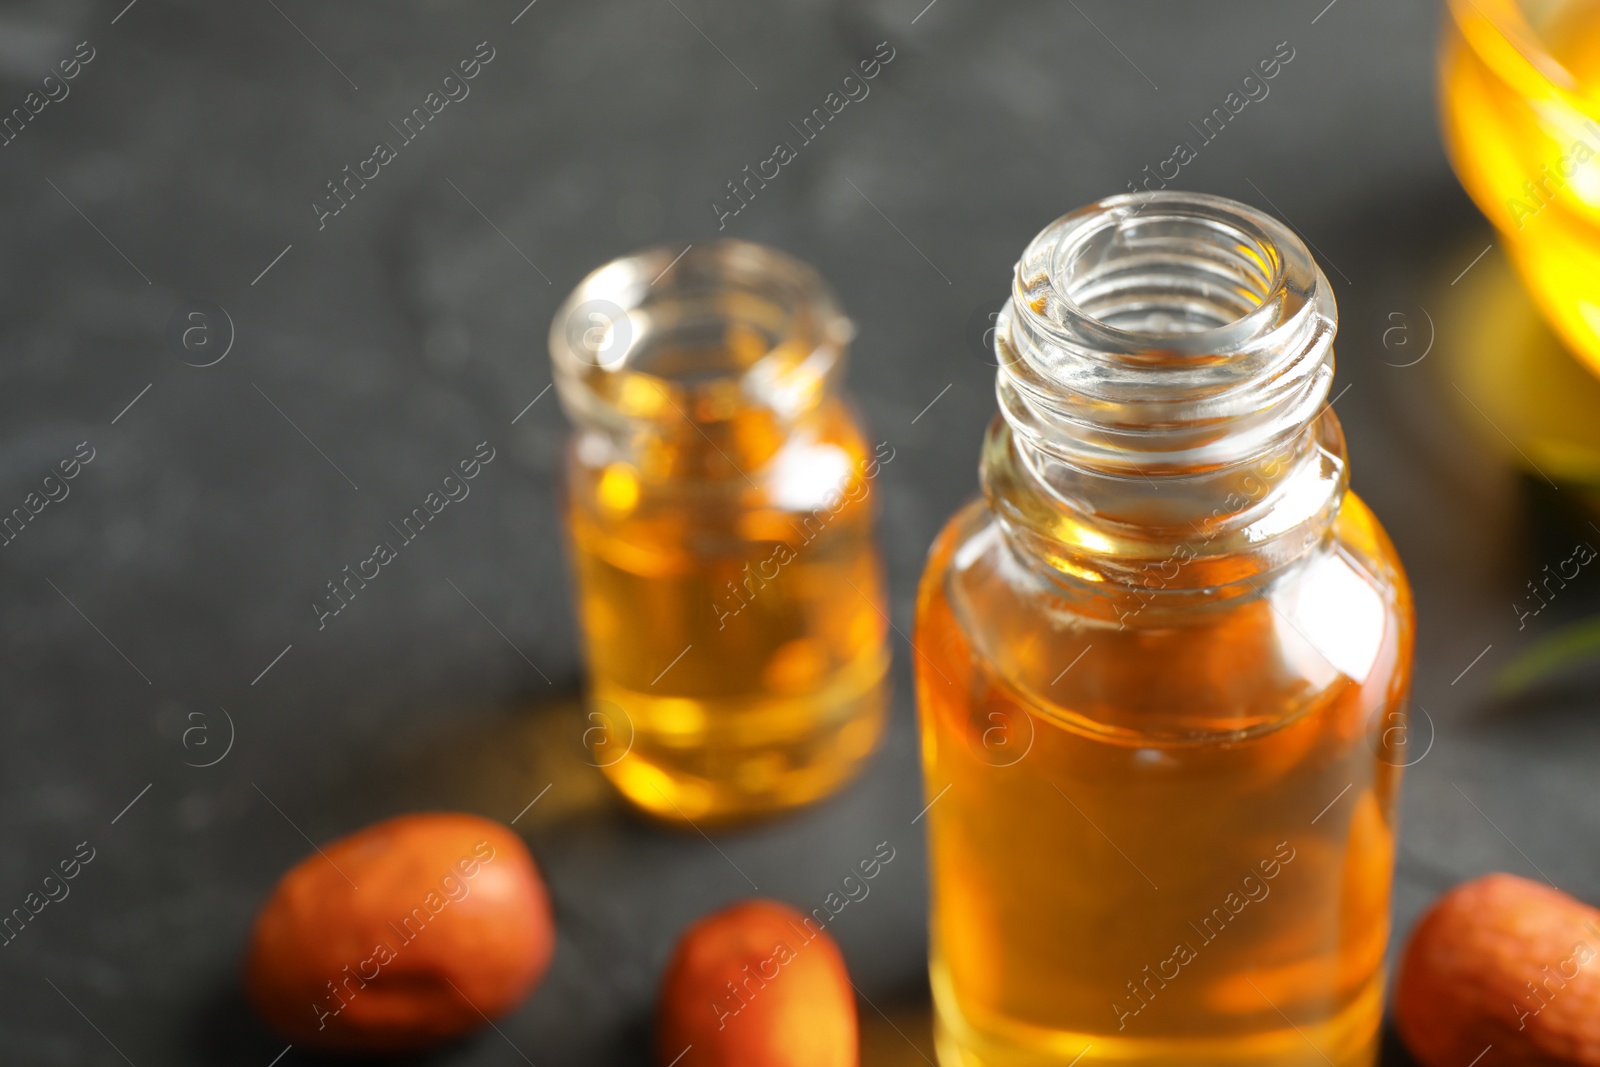 Photo of Jojoba oil in glass bottle on table, closeup view